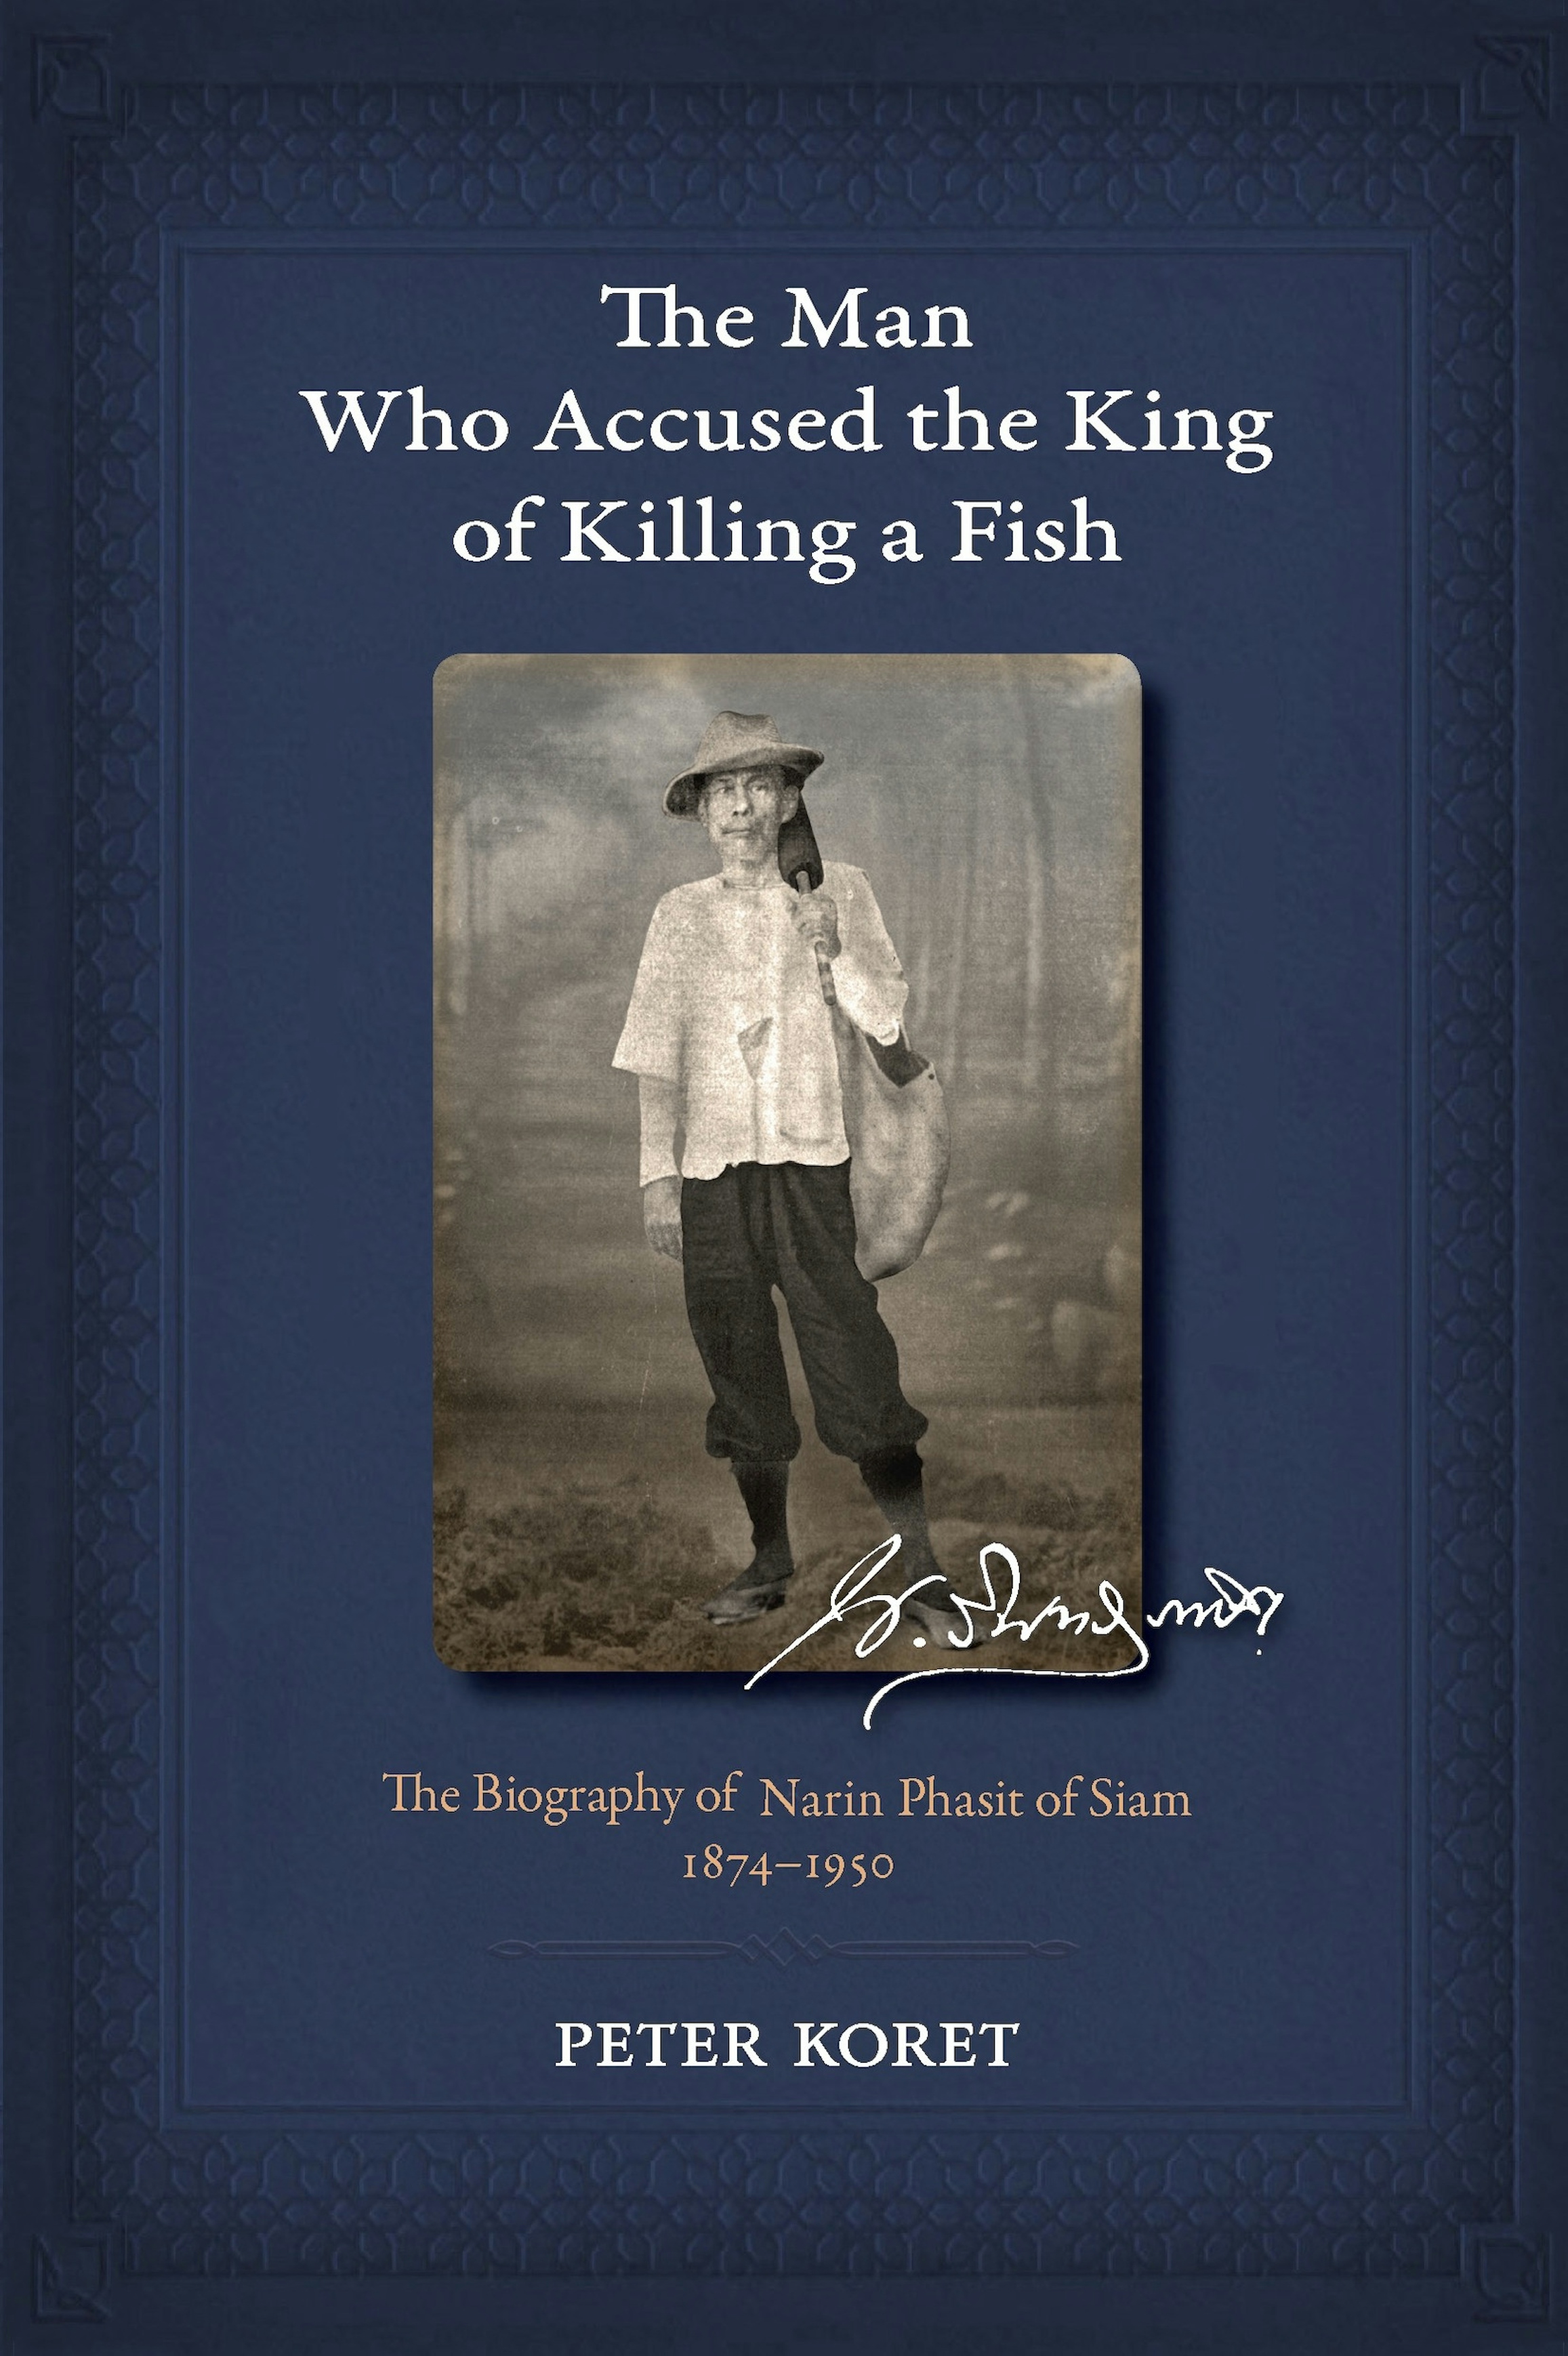 The Man Who Accused the King of Killing a Fish